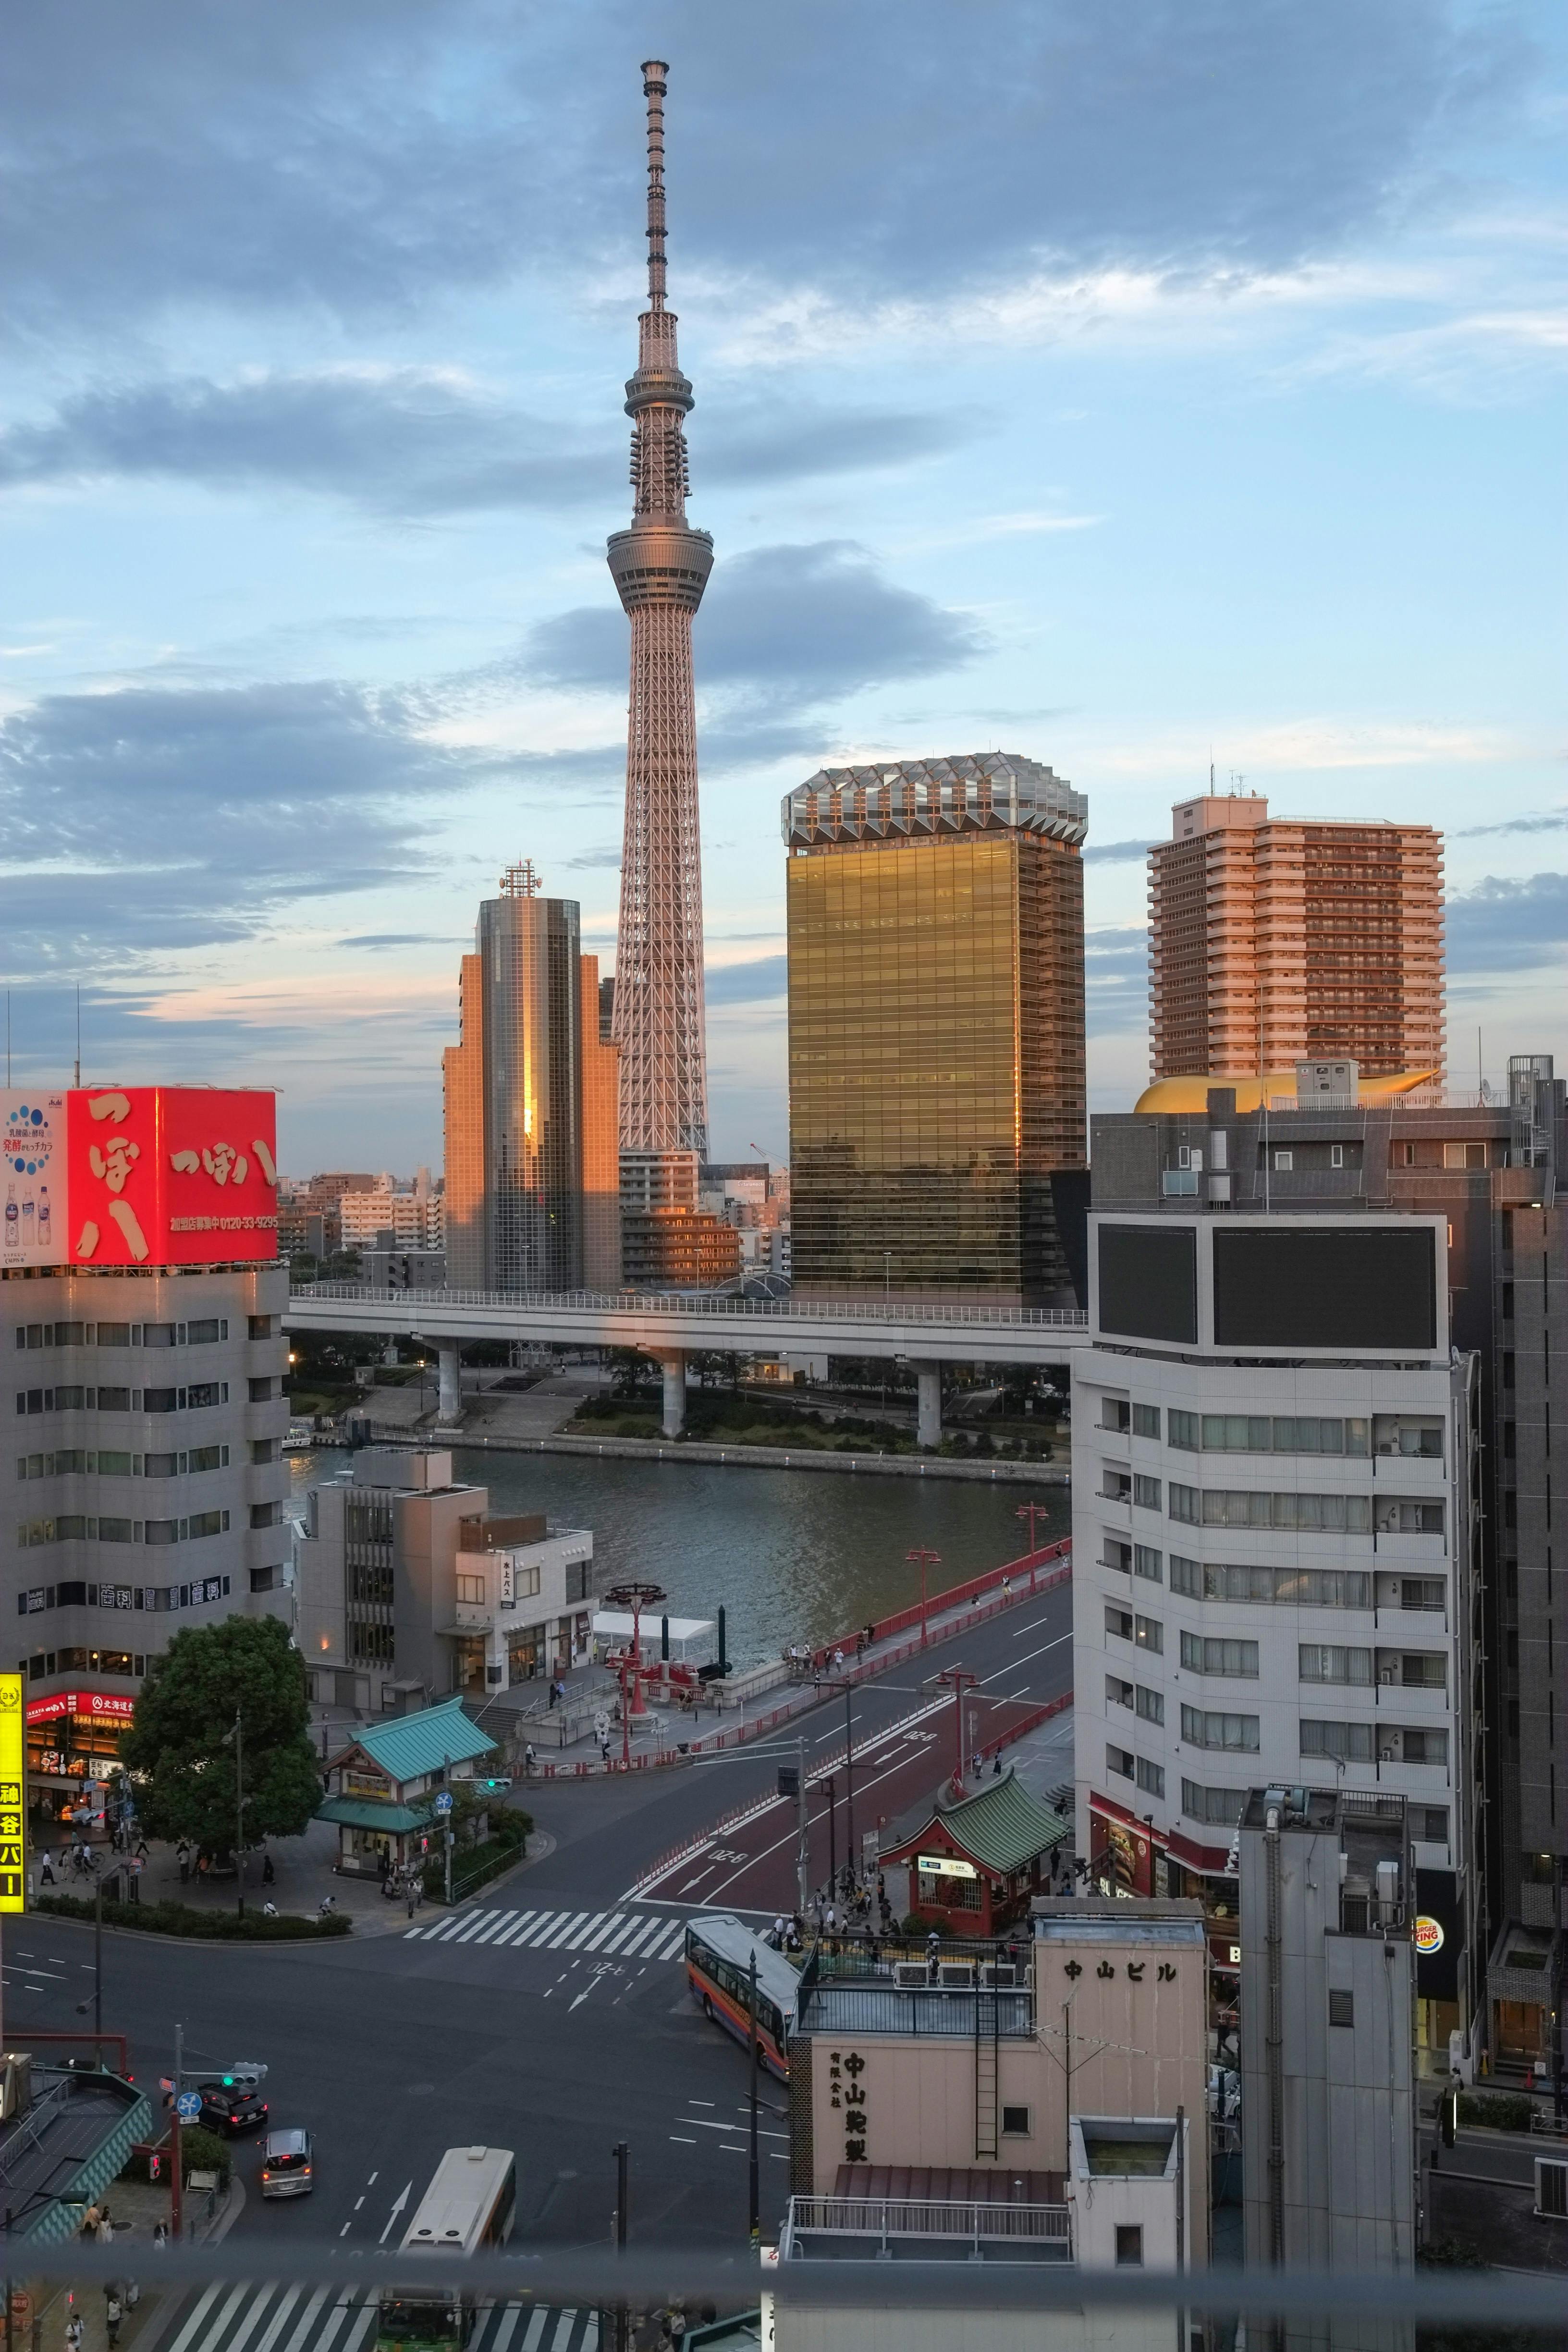 Aerial View of the Street by Sumida River with View of the Tokyo 